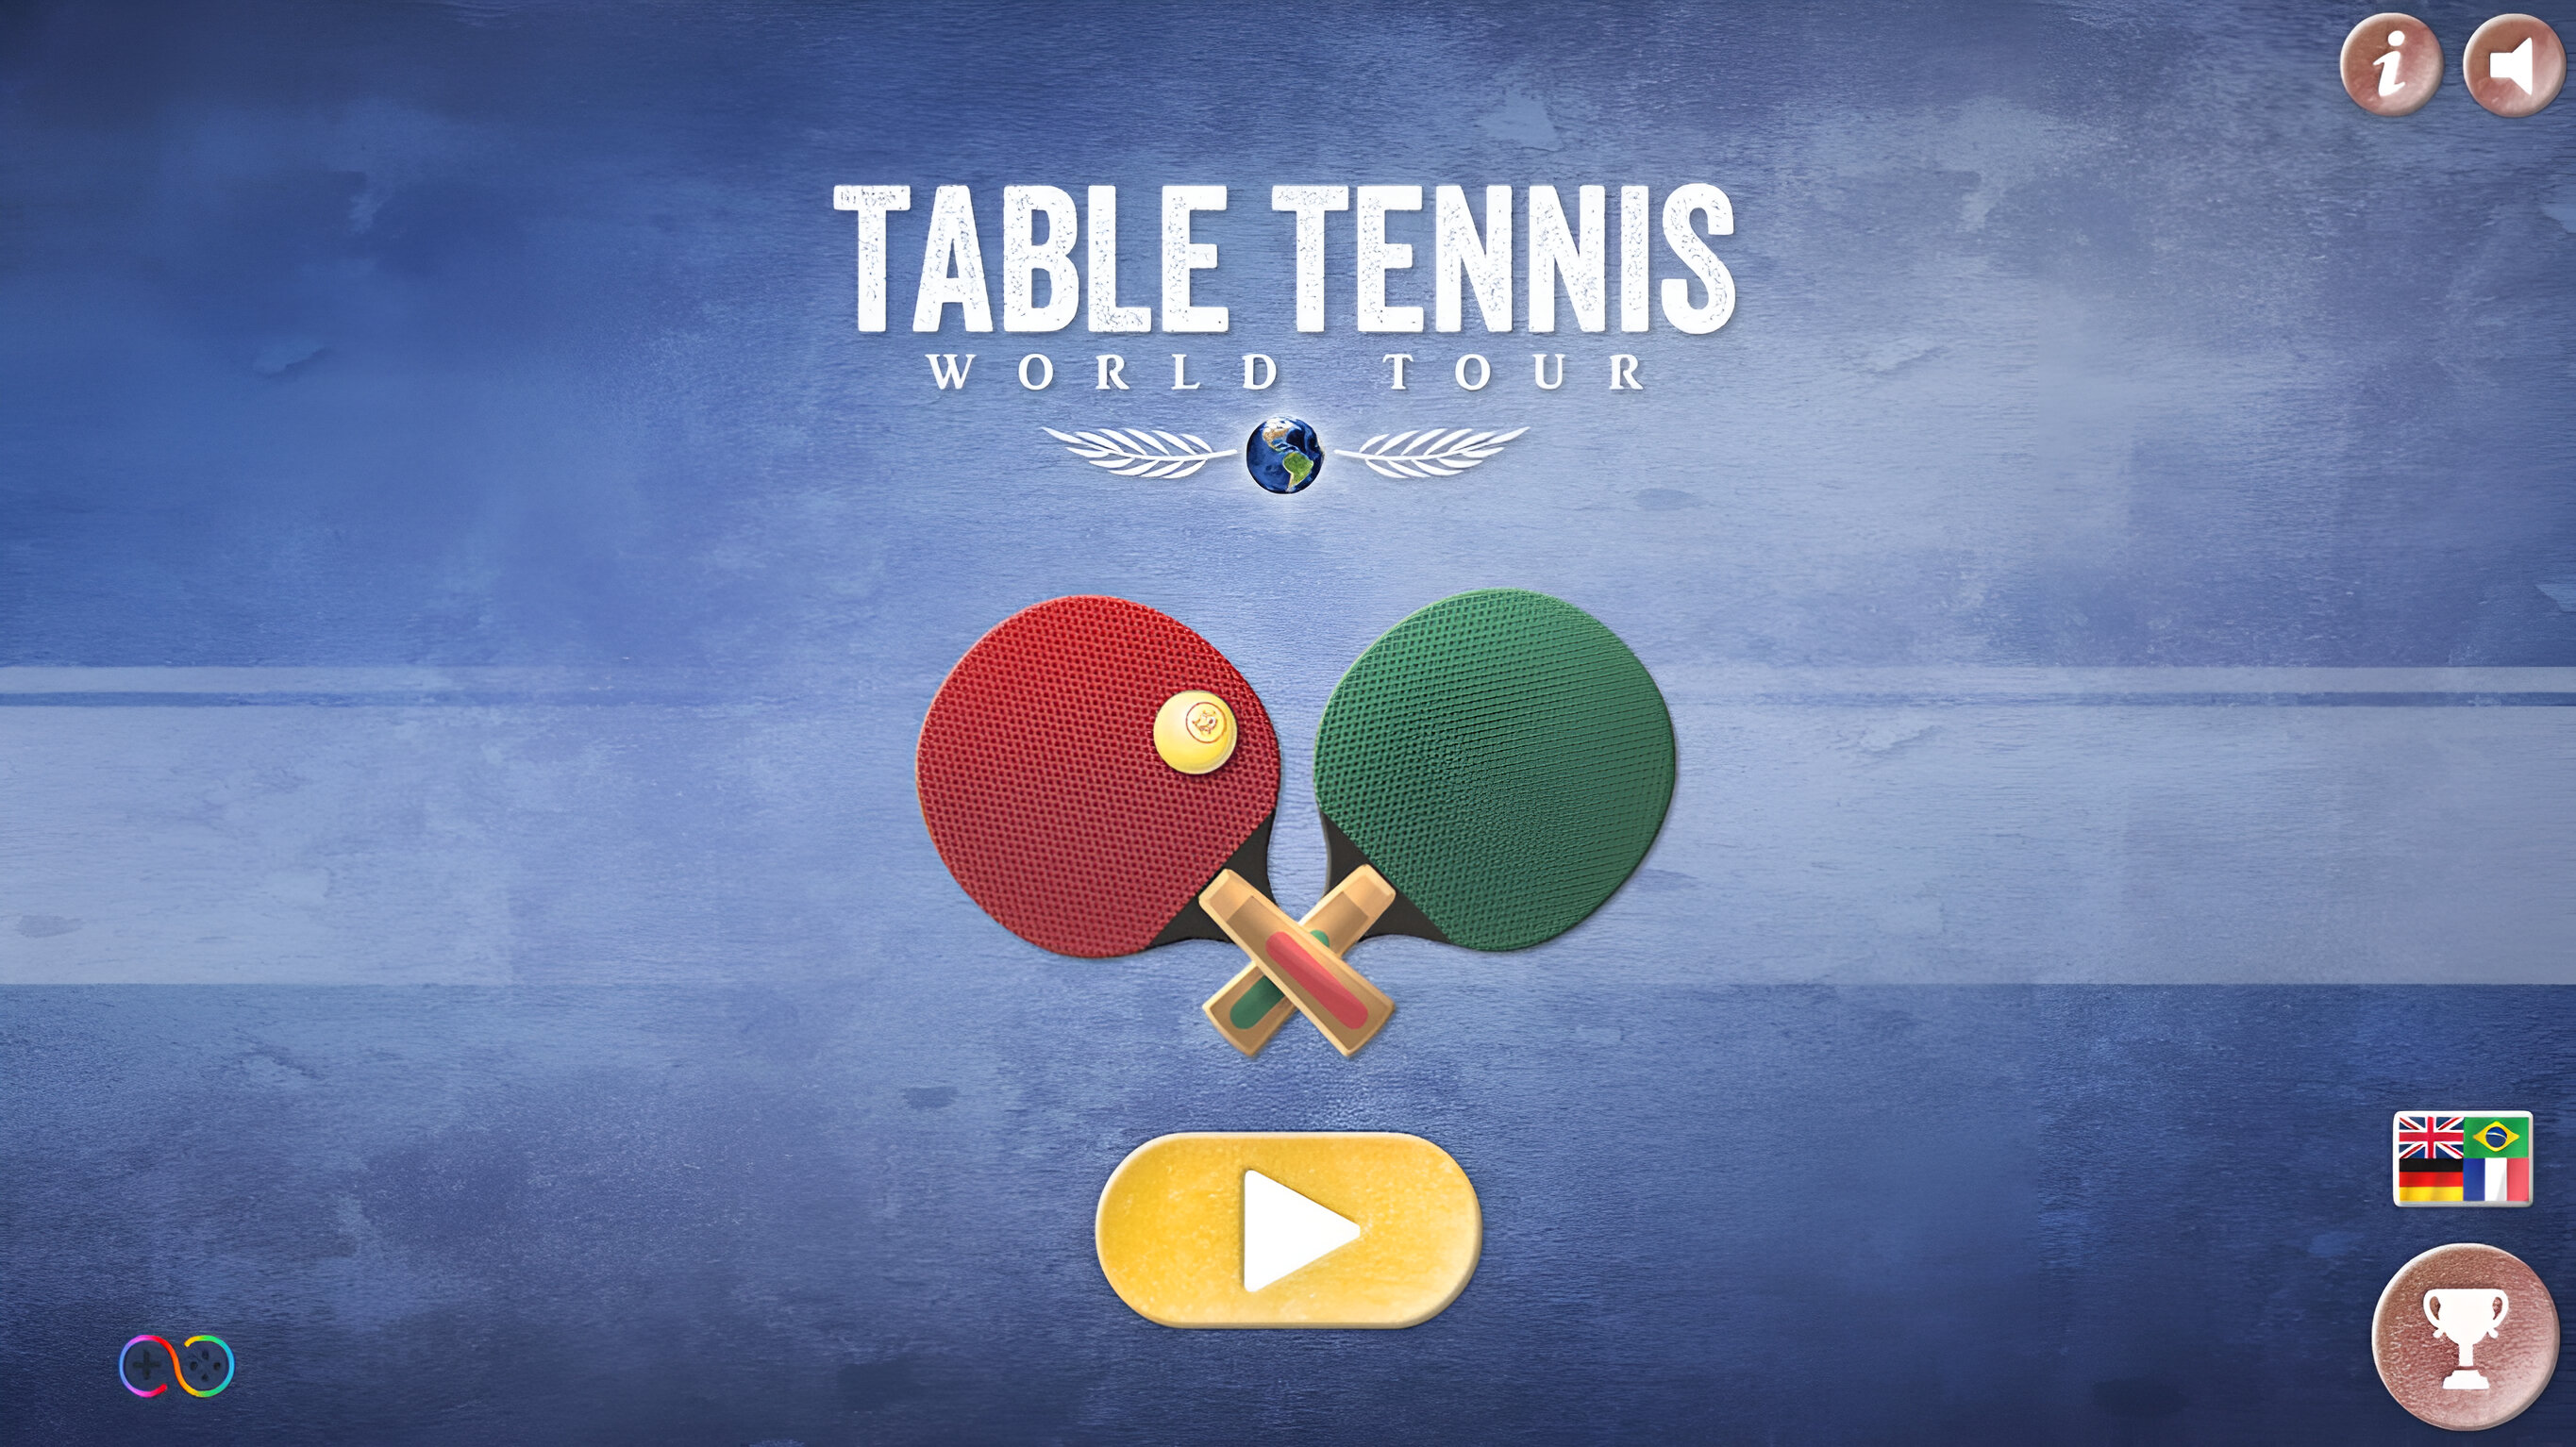 Image Table Tennis World Tour - Play Free Online Ping Pong Game